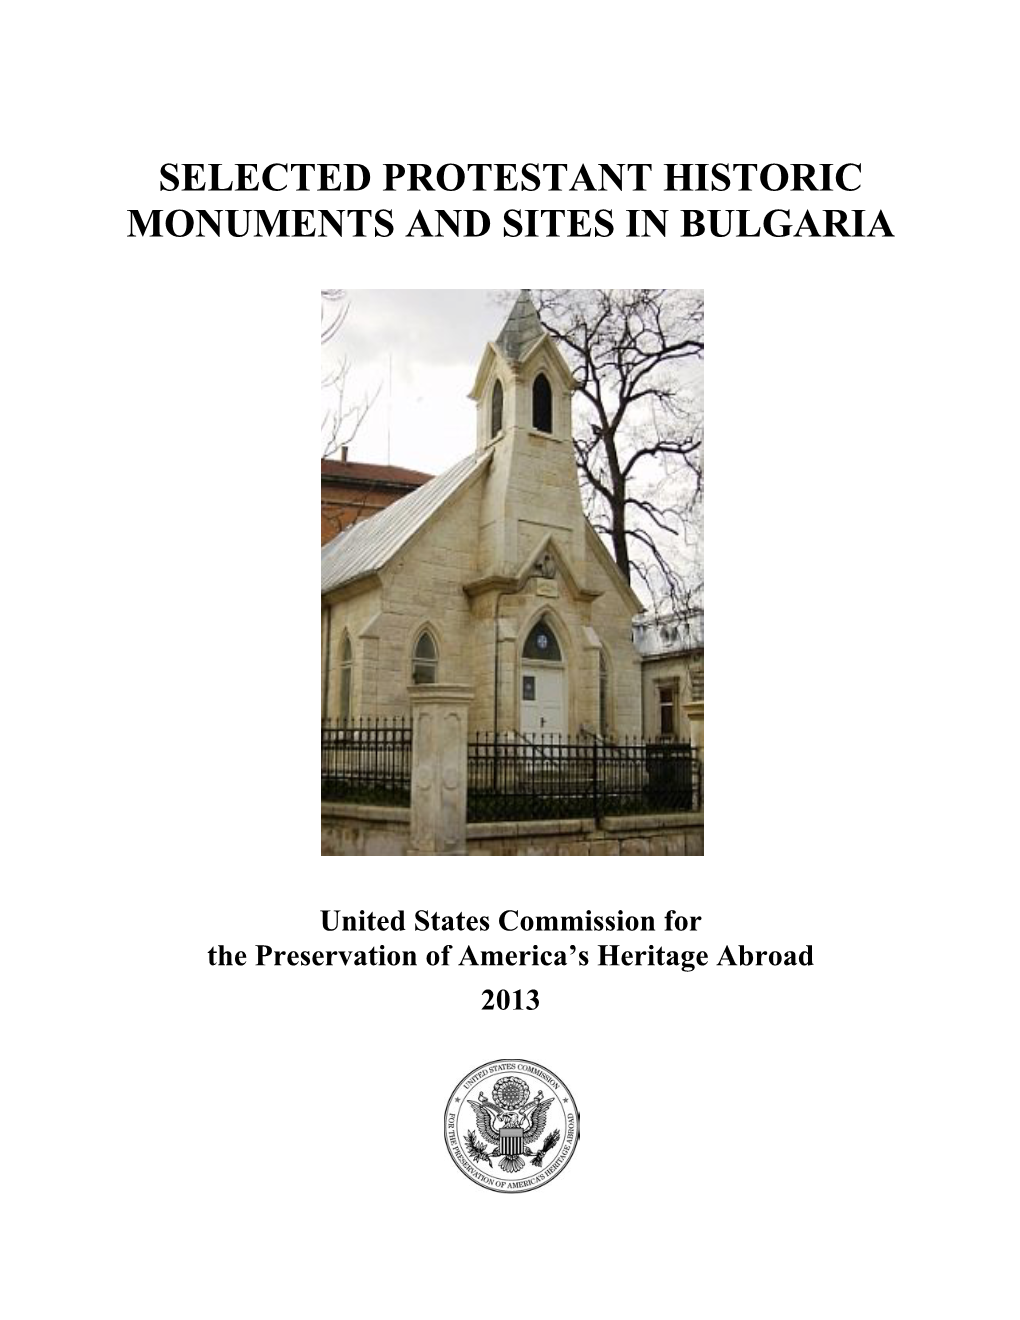 Selected Protestant Historic Monuments and Sites in Bulgaria